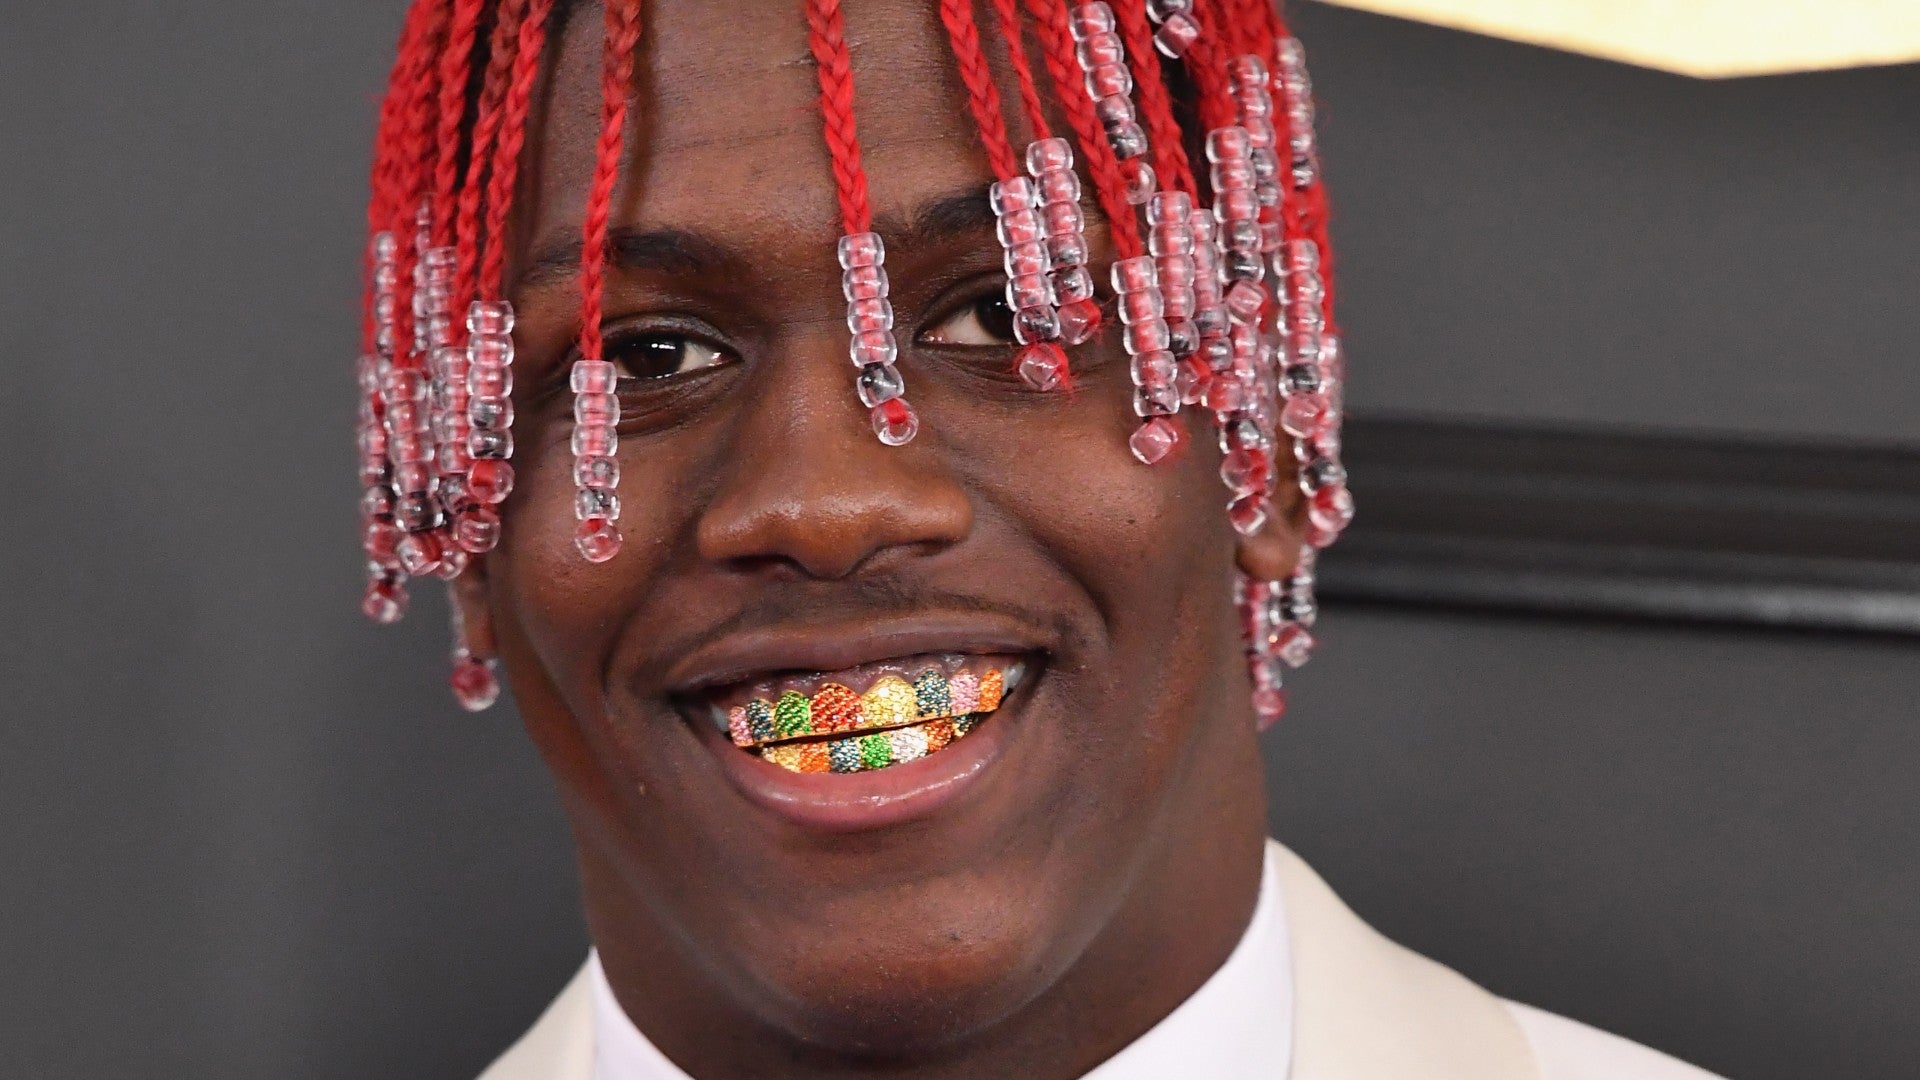 Lil Yachty's Summery Nail Art Is Giving Us Happy Vibes